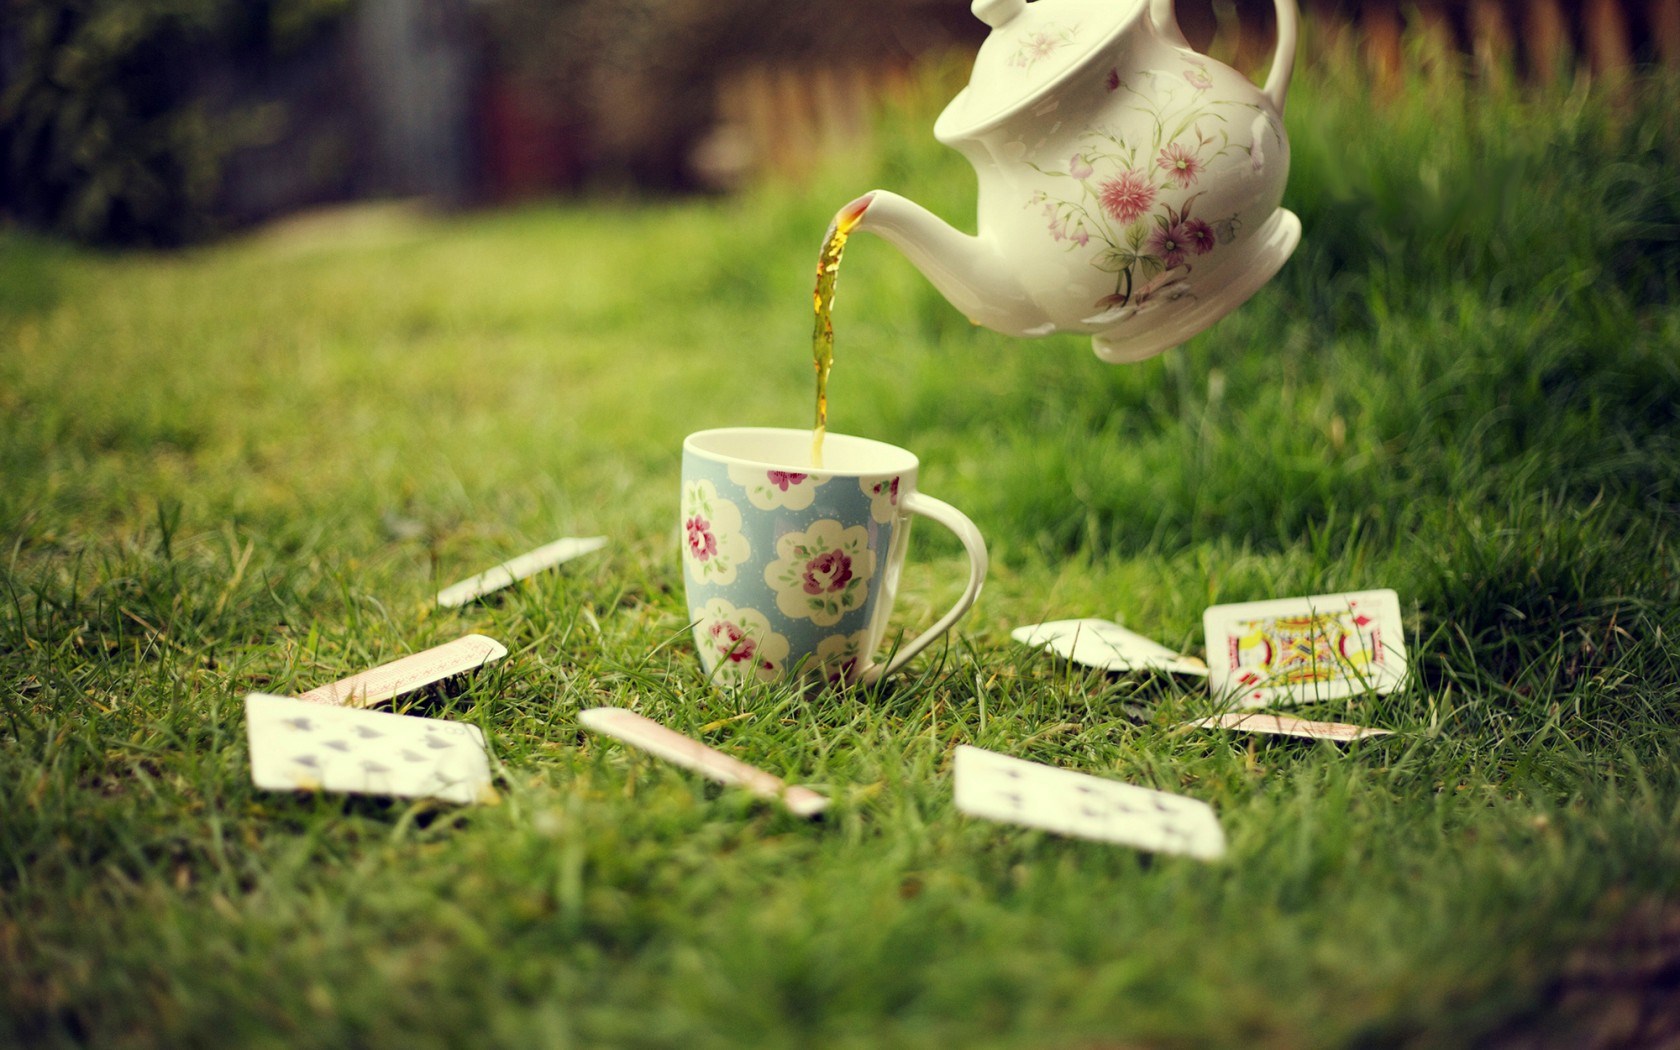 Wallpaper Details File Name Cup Teapot Tea Grass Uploaded By Armey